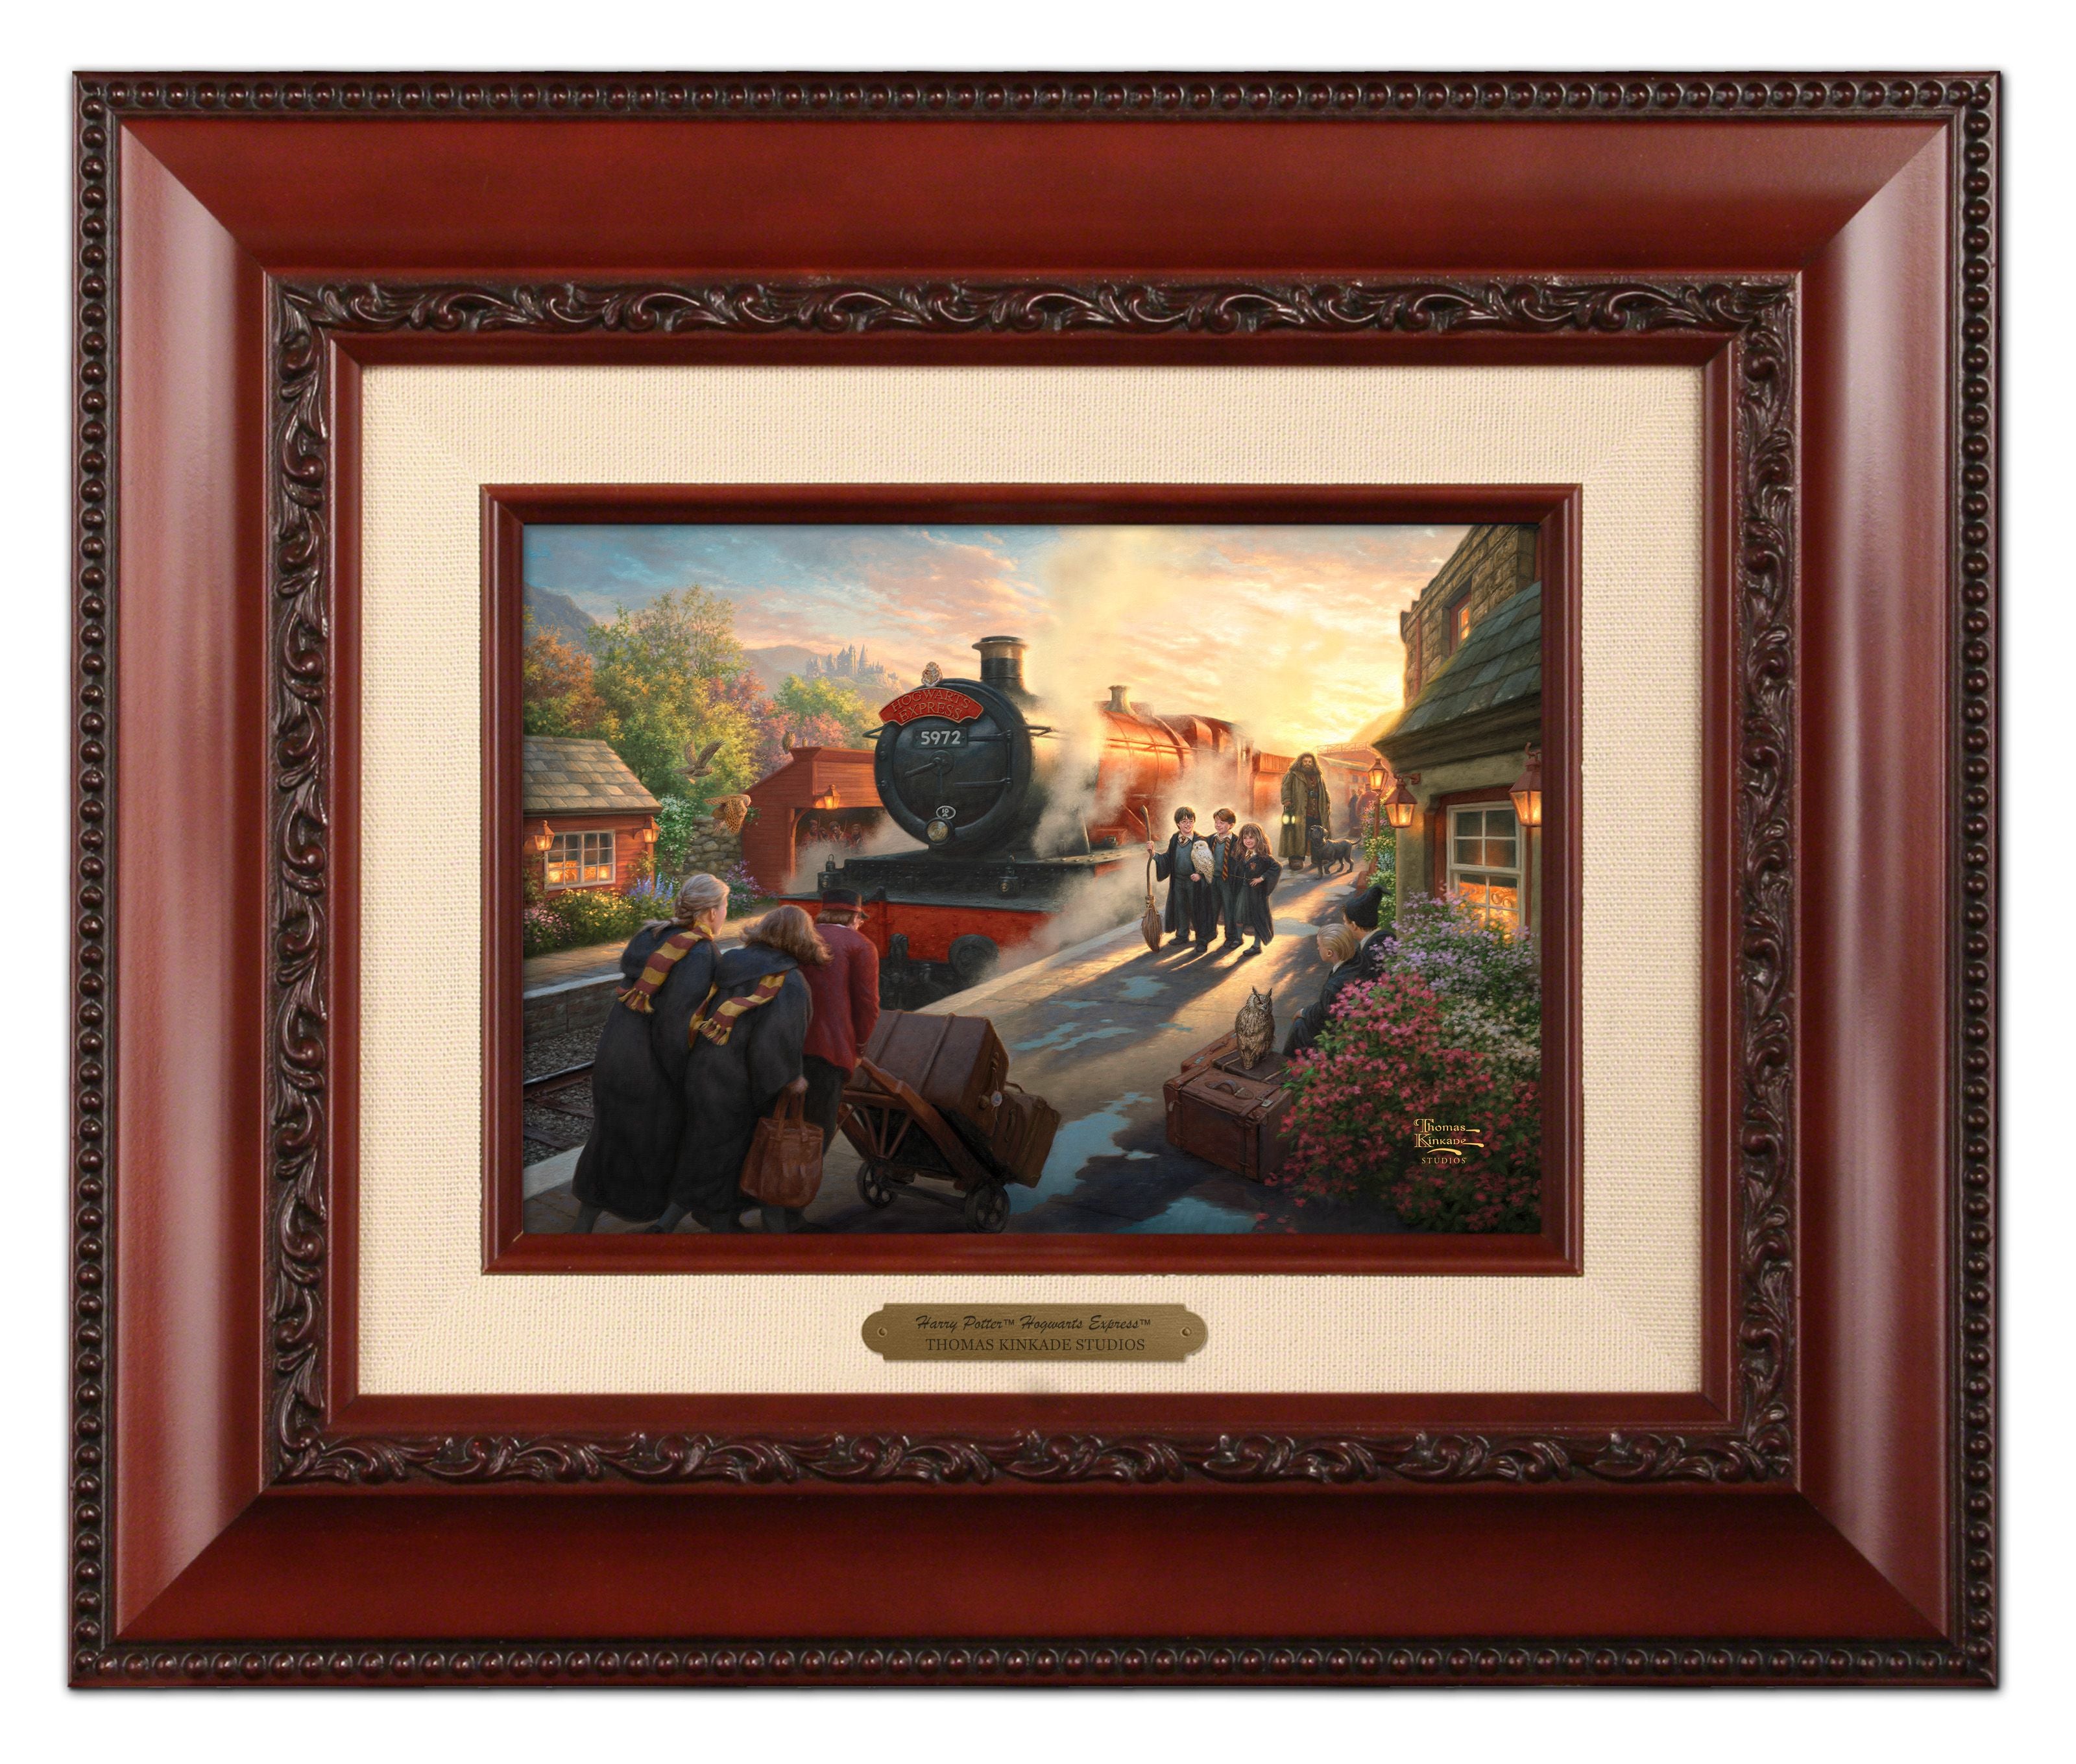 Rubeus Hagrid has come to collect Harry and travel with him to the school on the Hogwarts Express. Burl Frame